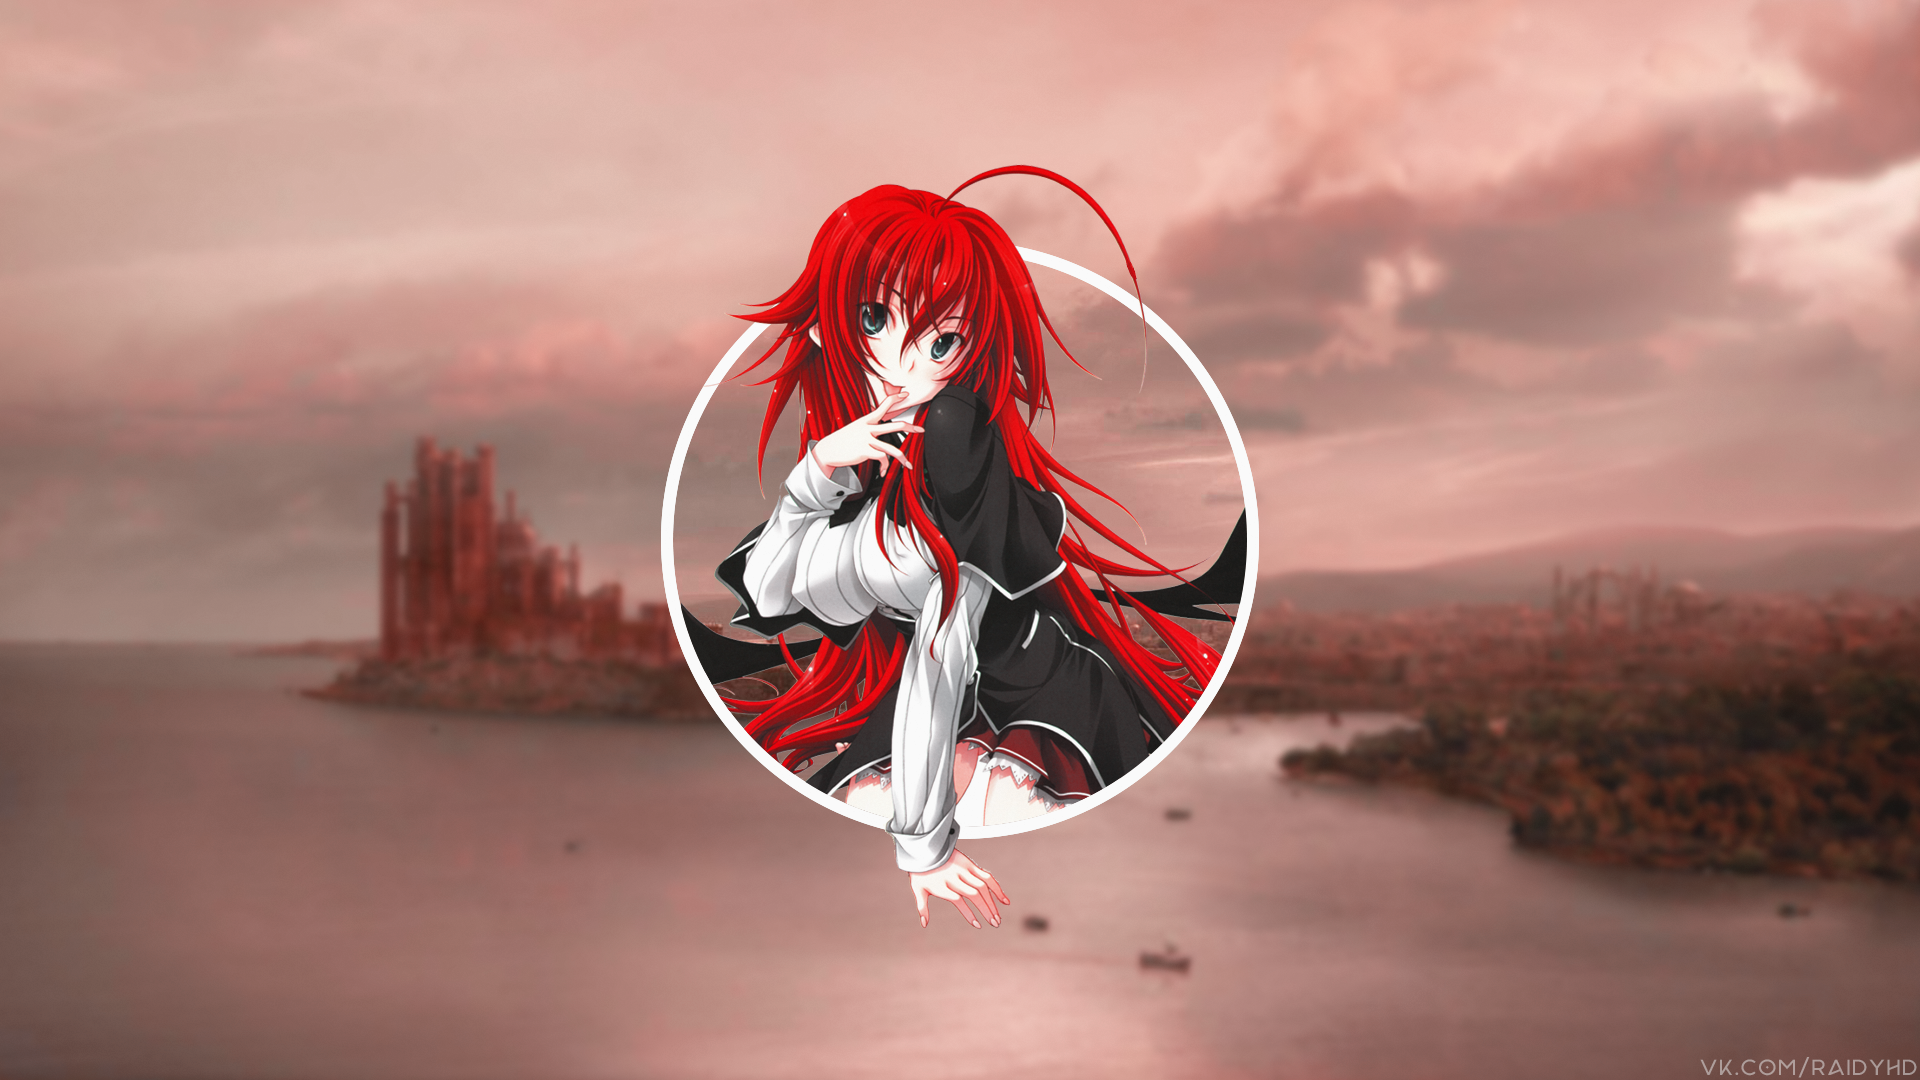 Anime Anime Girls Picture In Picture Gremory Rias Highschool DxD 1920x1080